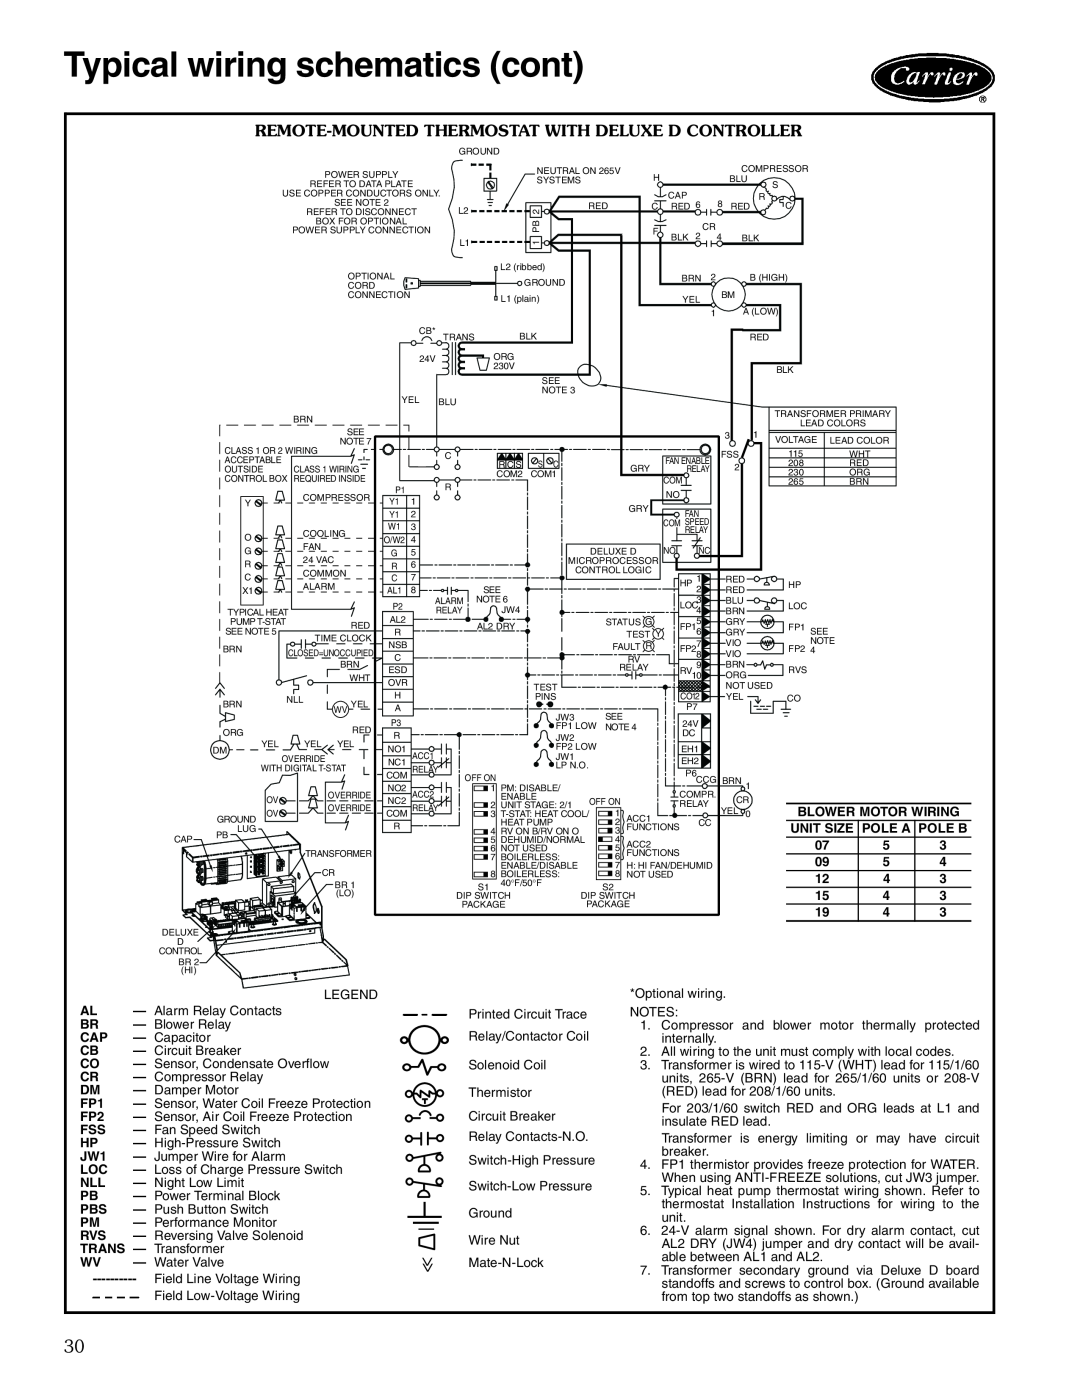 Carrier 50KQL-1PD Typical wiring schematics cont, Remote-Mounted Thermostat With Deluxe D Controller, Fan Enable, Relay 